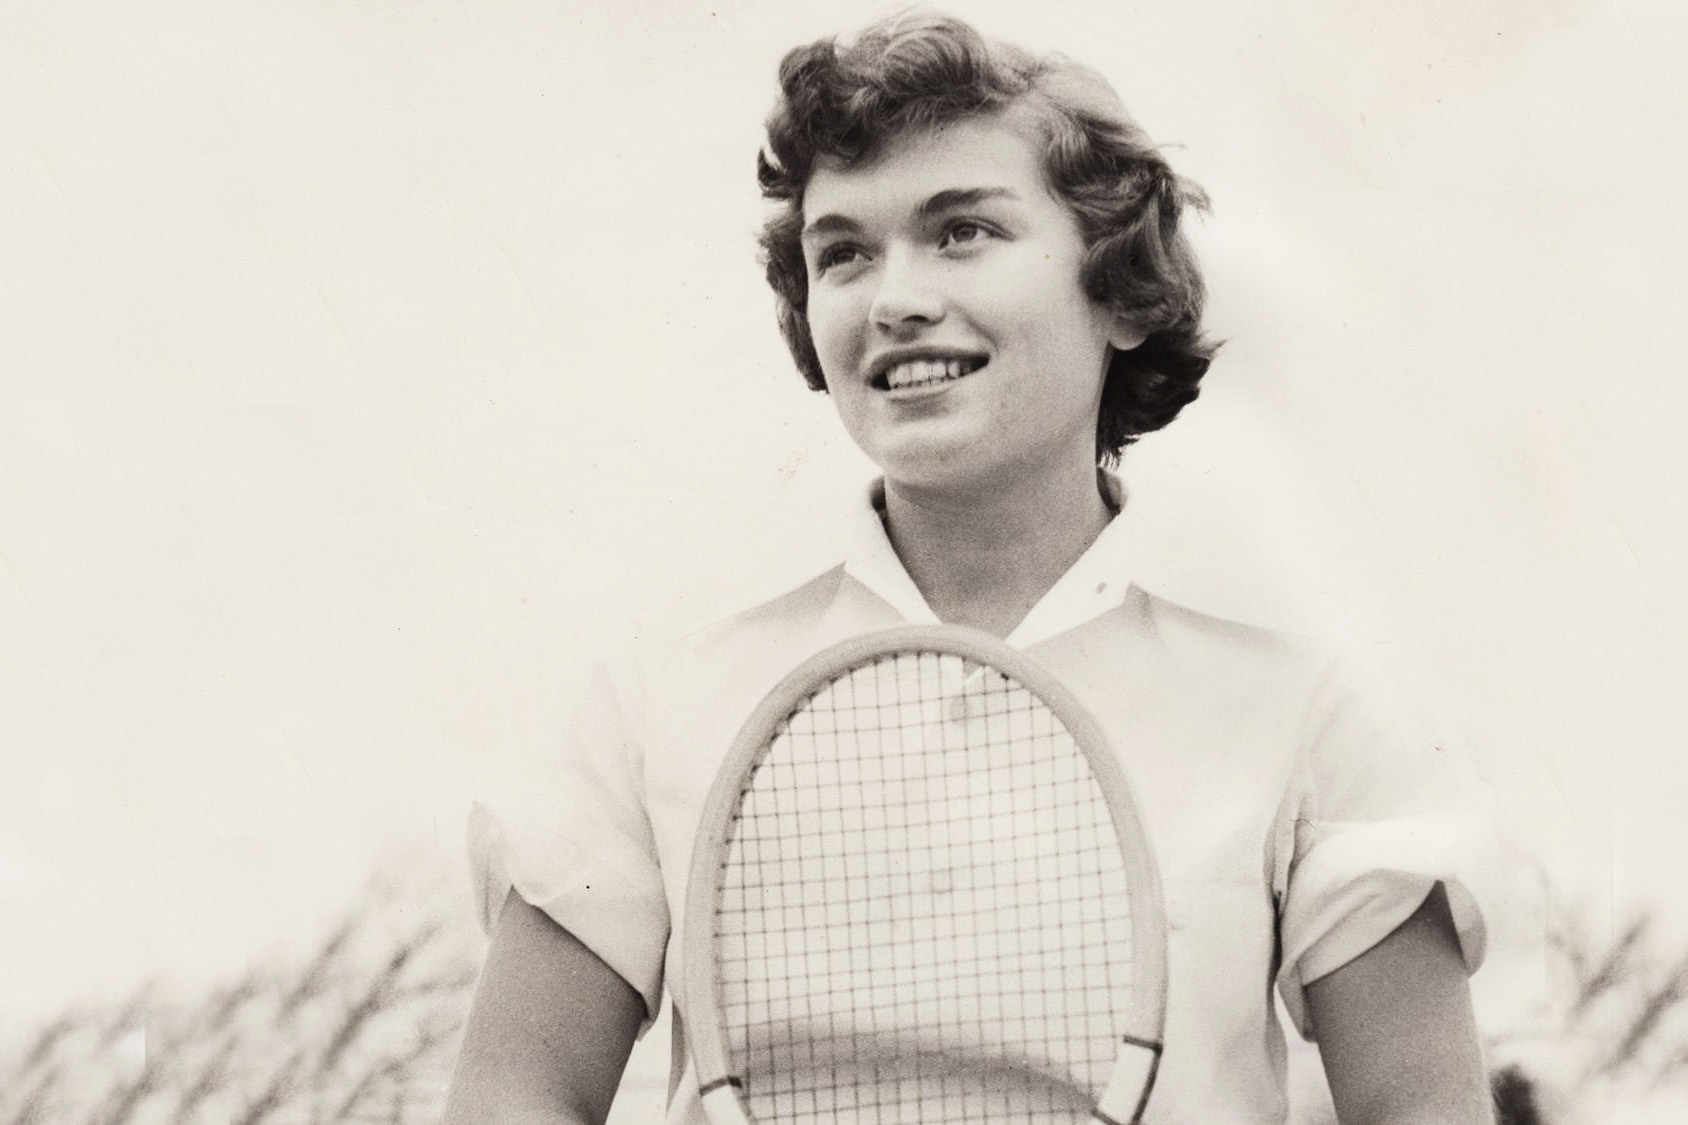 black and white photo of Slaughter standing with a tennis racket looking to the left of the photo